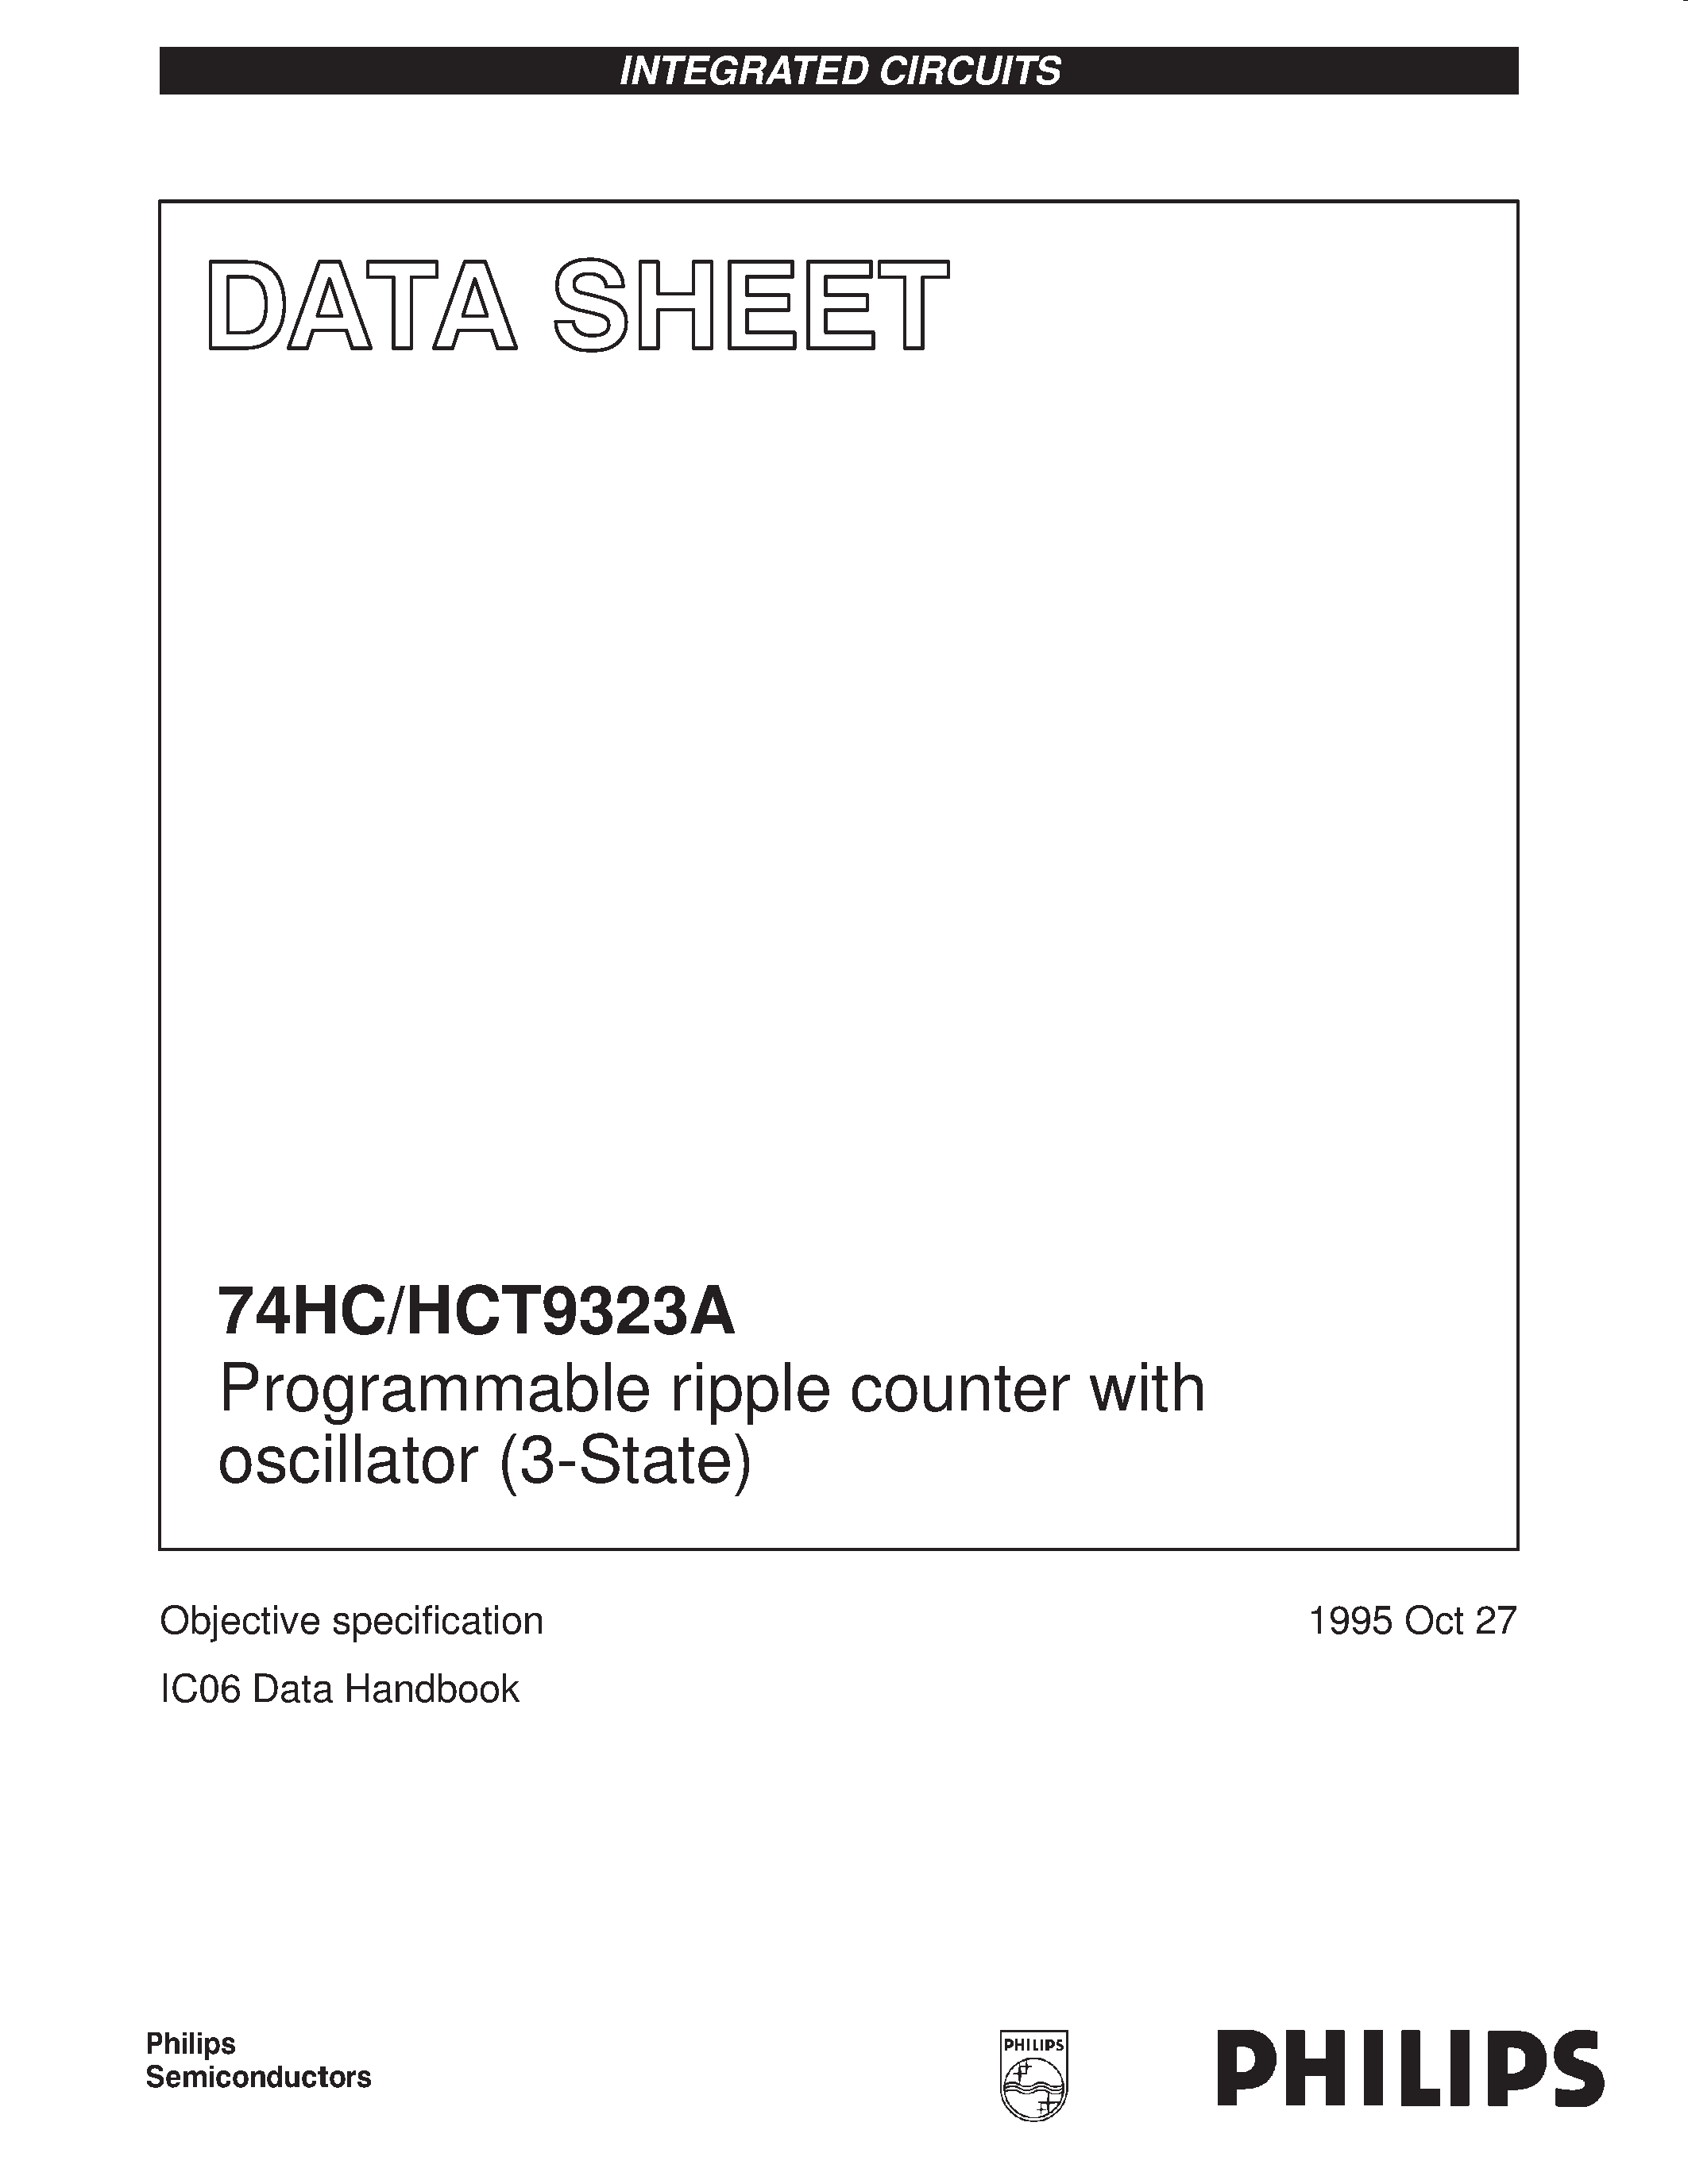 Datasheet 74HCT9323A - Programmable ripple counter with oscillator 3-State page 1